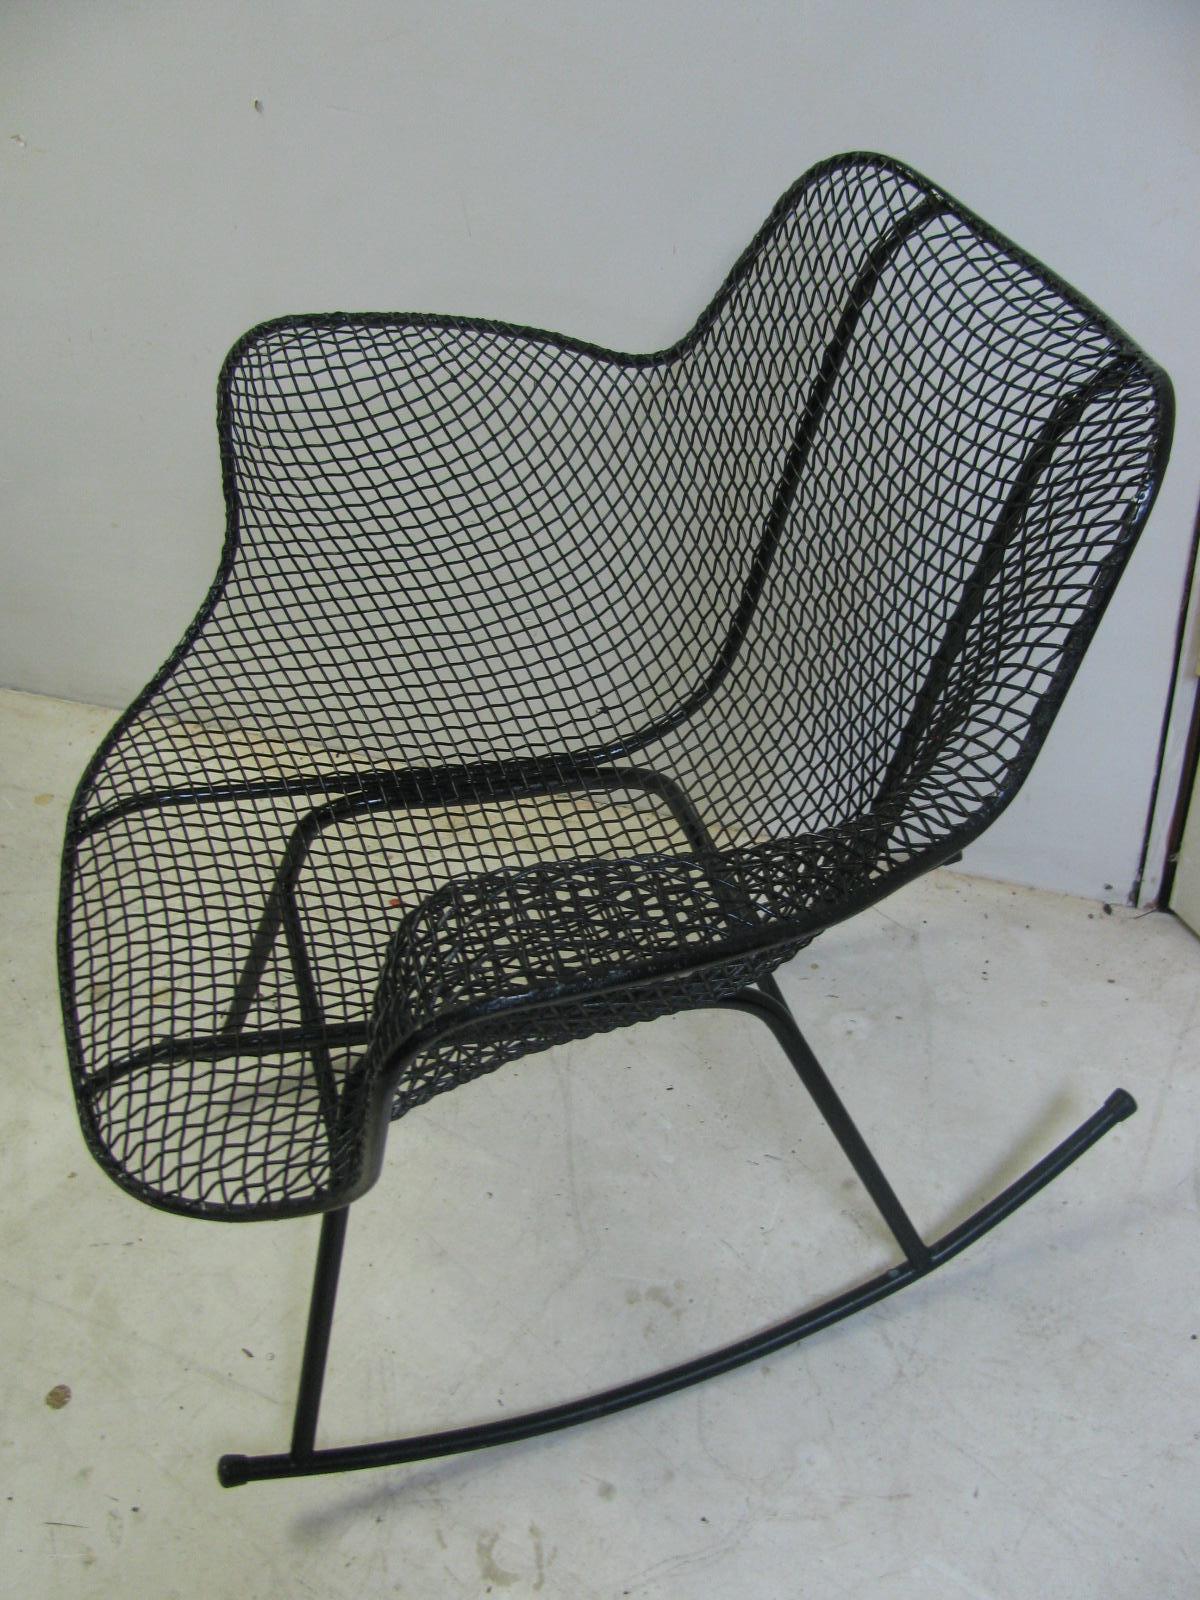 Fabulous example of Mid-Century Modern in a outdoor patio rocking chair. In excellent condition, freshly sprayed black.